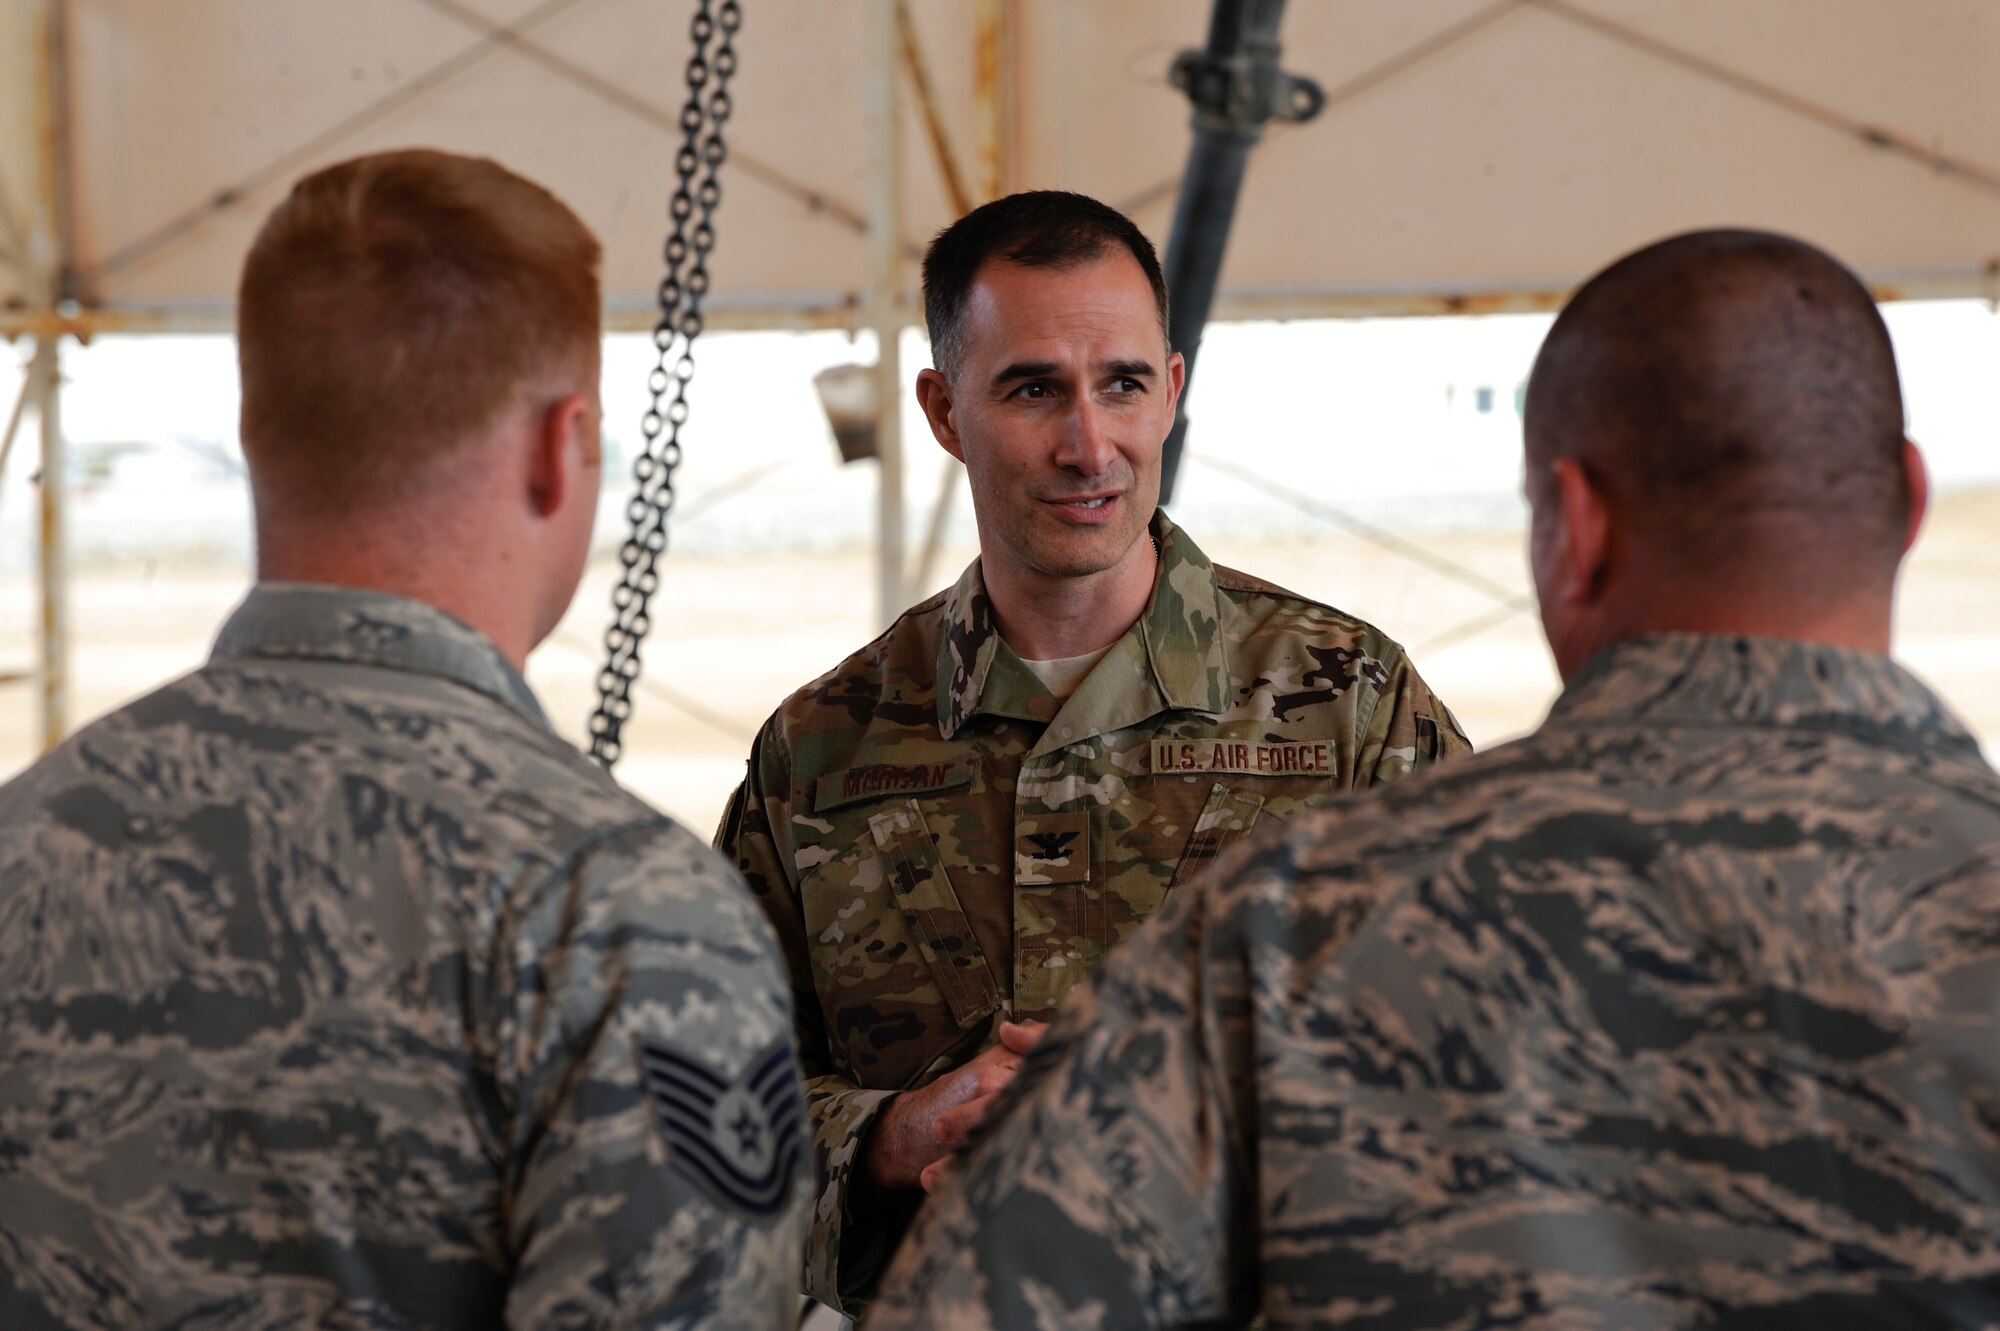 U.S. Air Force Col. Troy Morgan, U.S. Air Forces Central Command deputy air reserve component advisor, speaks to Airmen at the ammunition compound on Al Dhafra Air Base, United Arab Emirates, Feb. 7, 2018. Directed by AFCENT in support of United States Central Command, the 380th Air Expeditionary Wing delivers decisive air, space, and cyberspace capabilities throughout the region. (U.S. Air Force photo by Airman 1st Class D. Blake Browning)